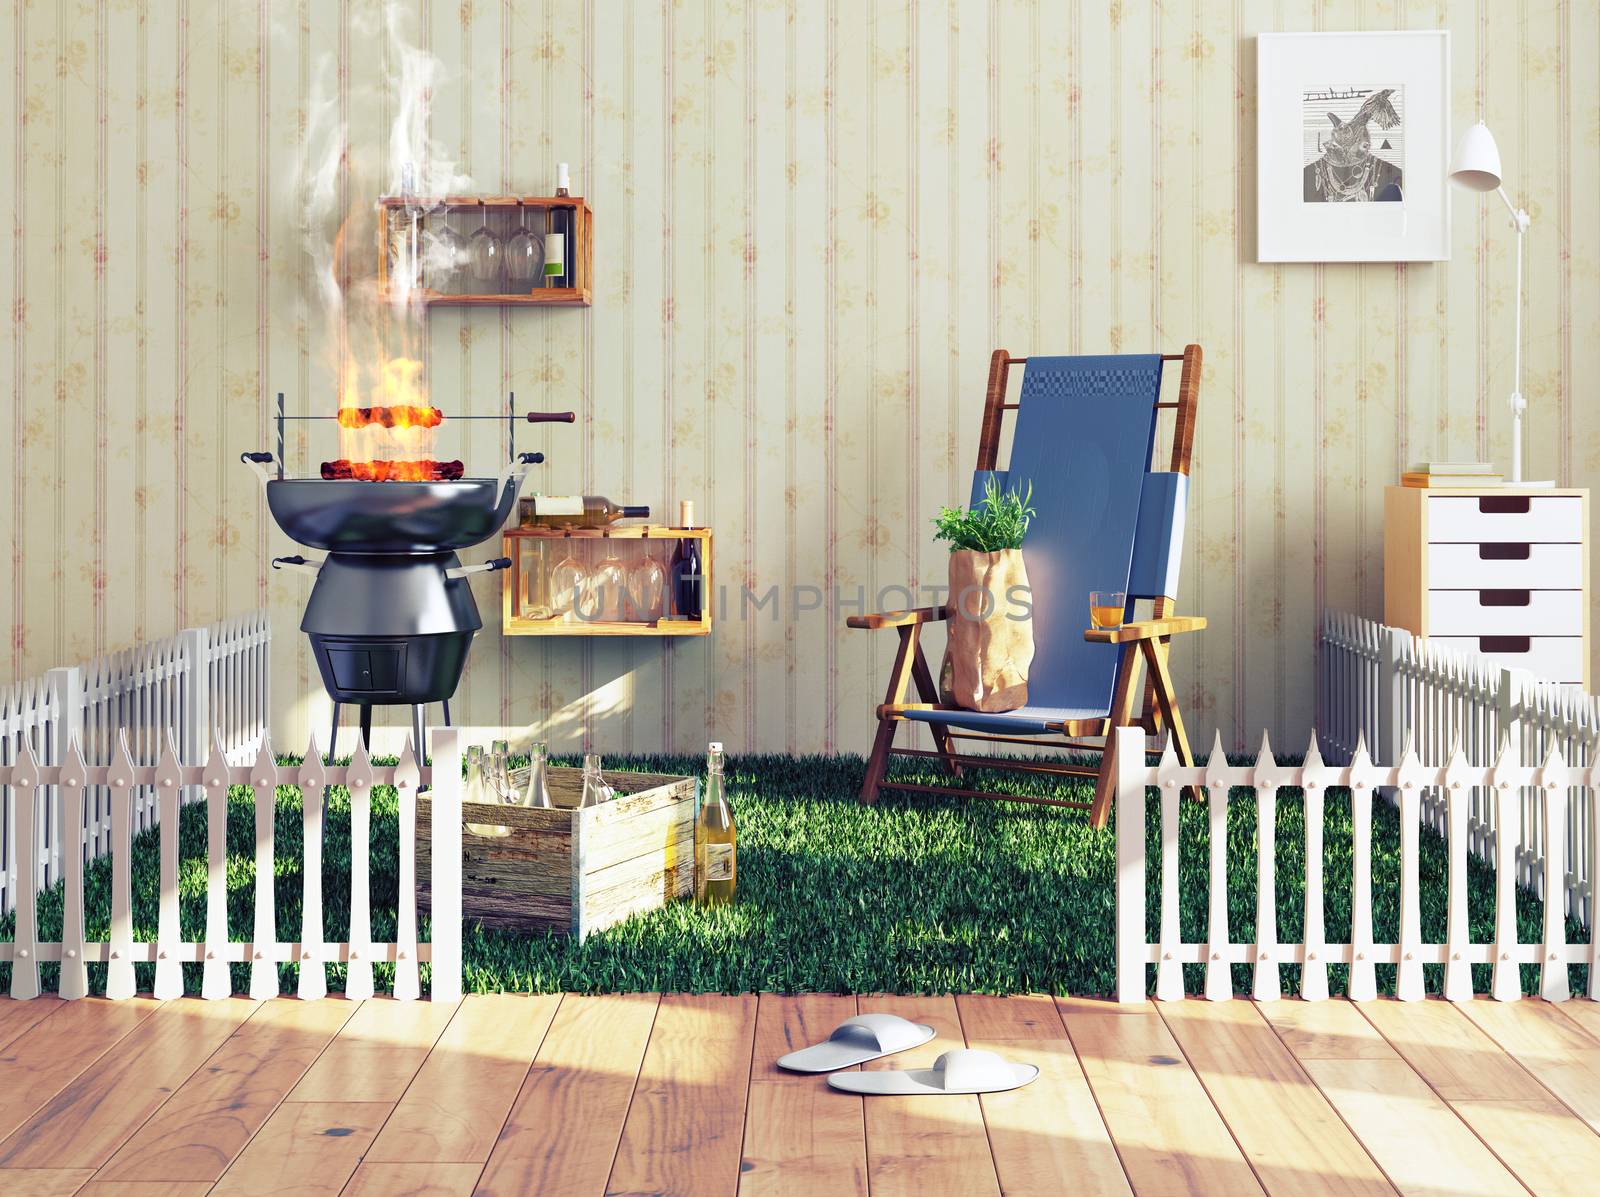 barbecue in a living room. 3d illustration creative concept